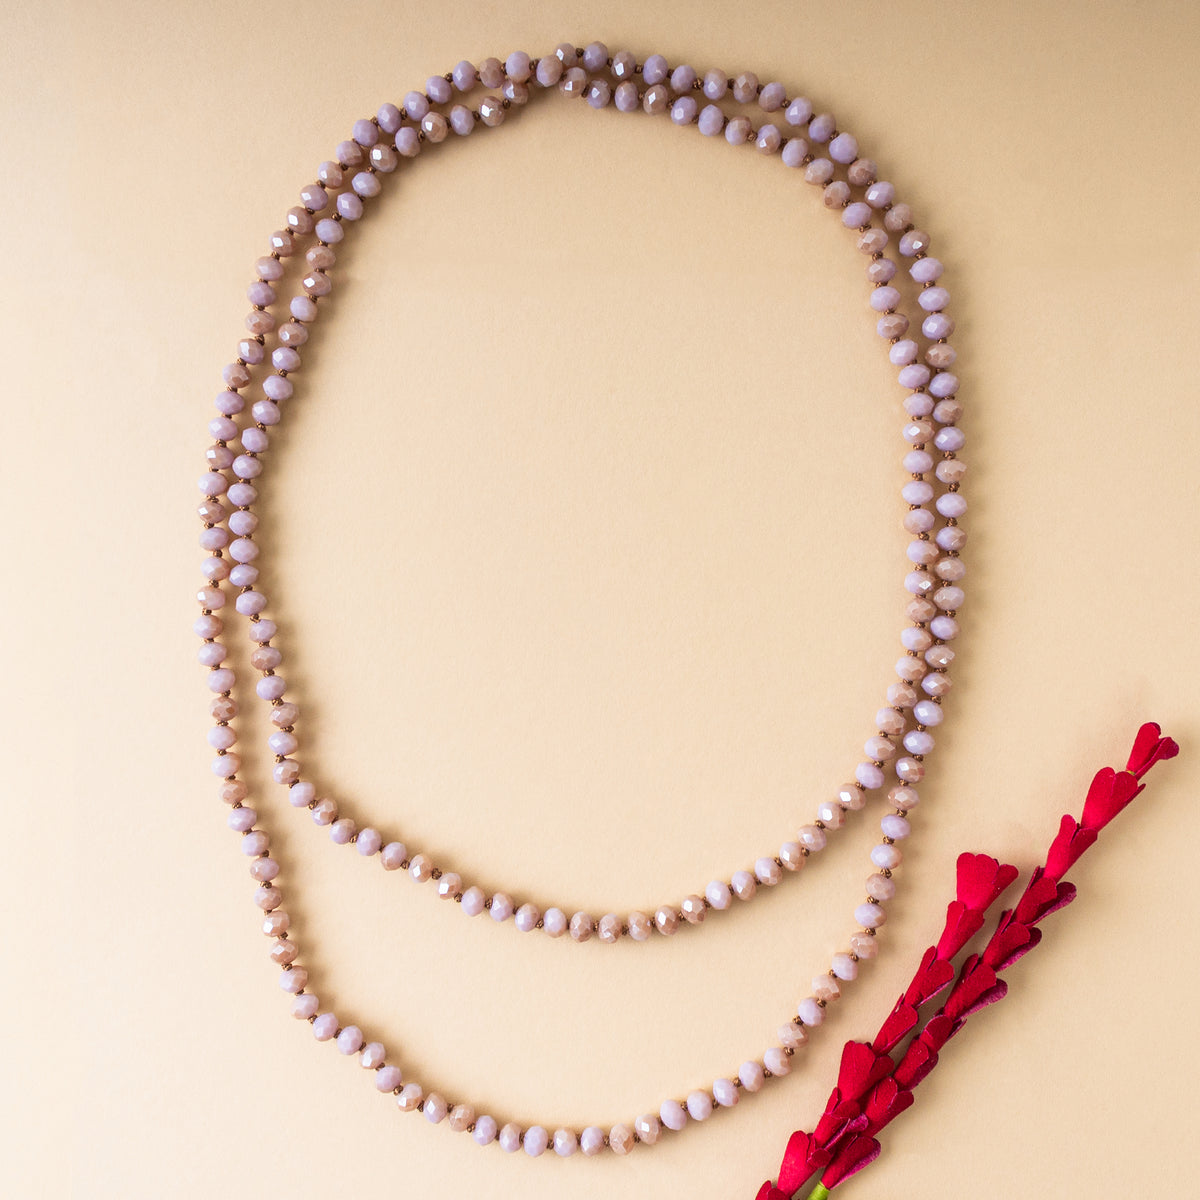 72028-9 - Beaded Necklace - Purple & Brown